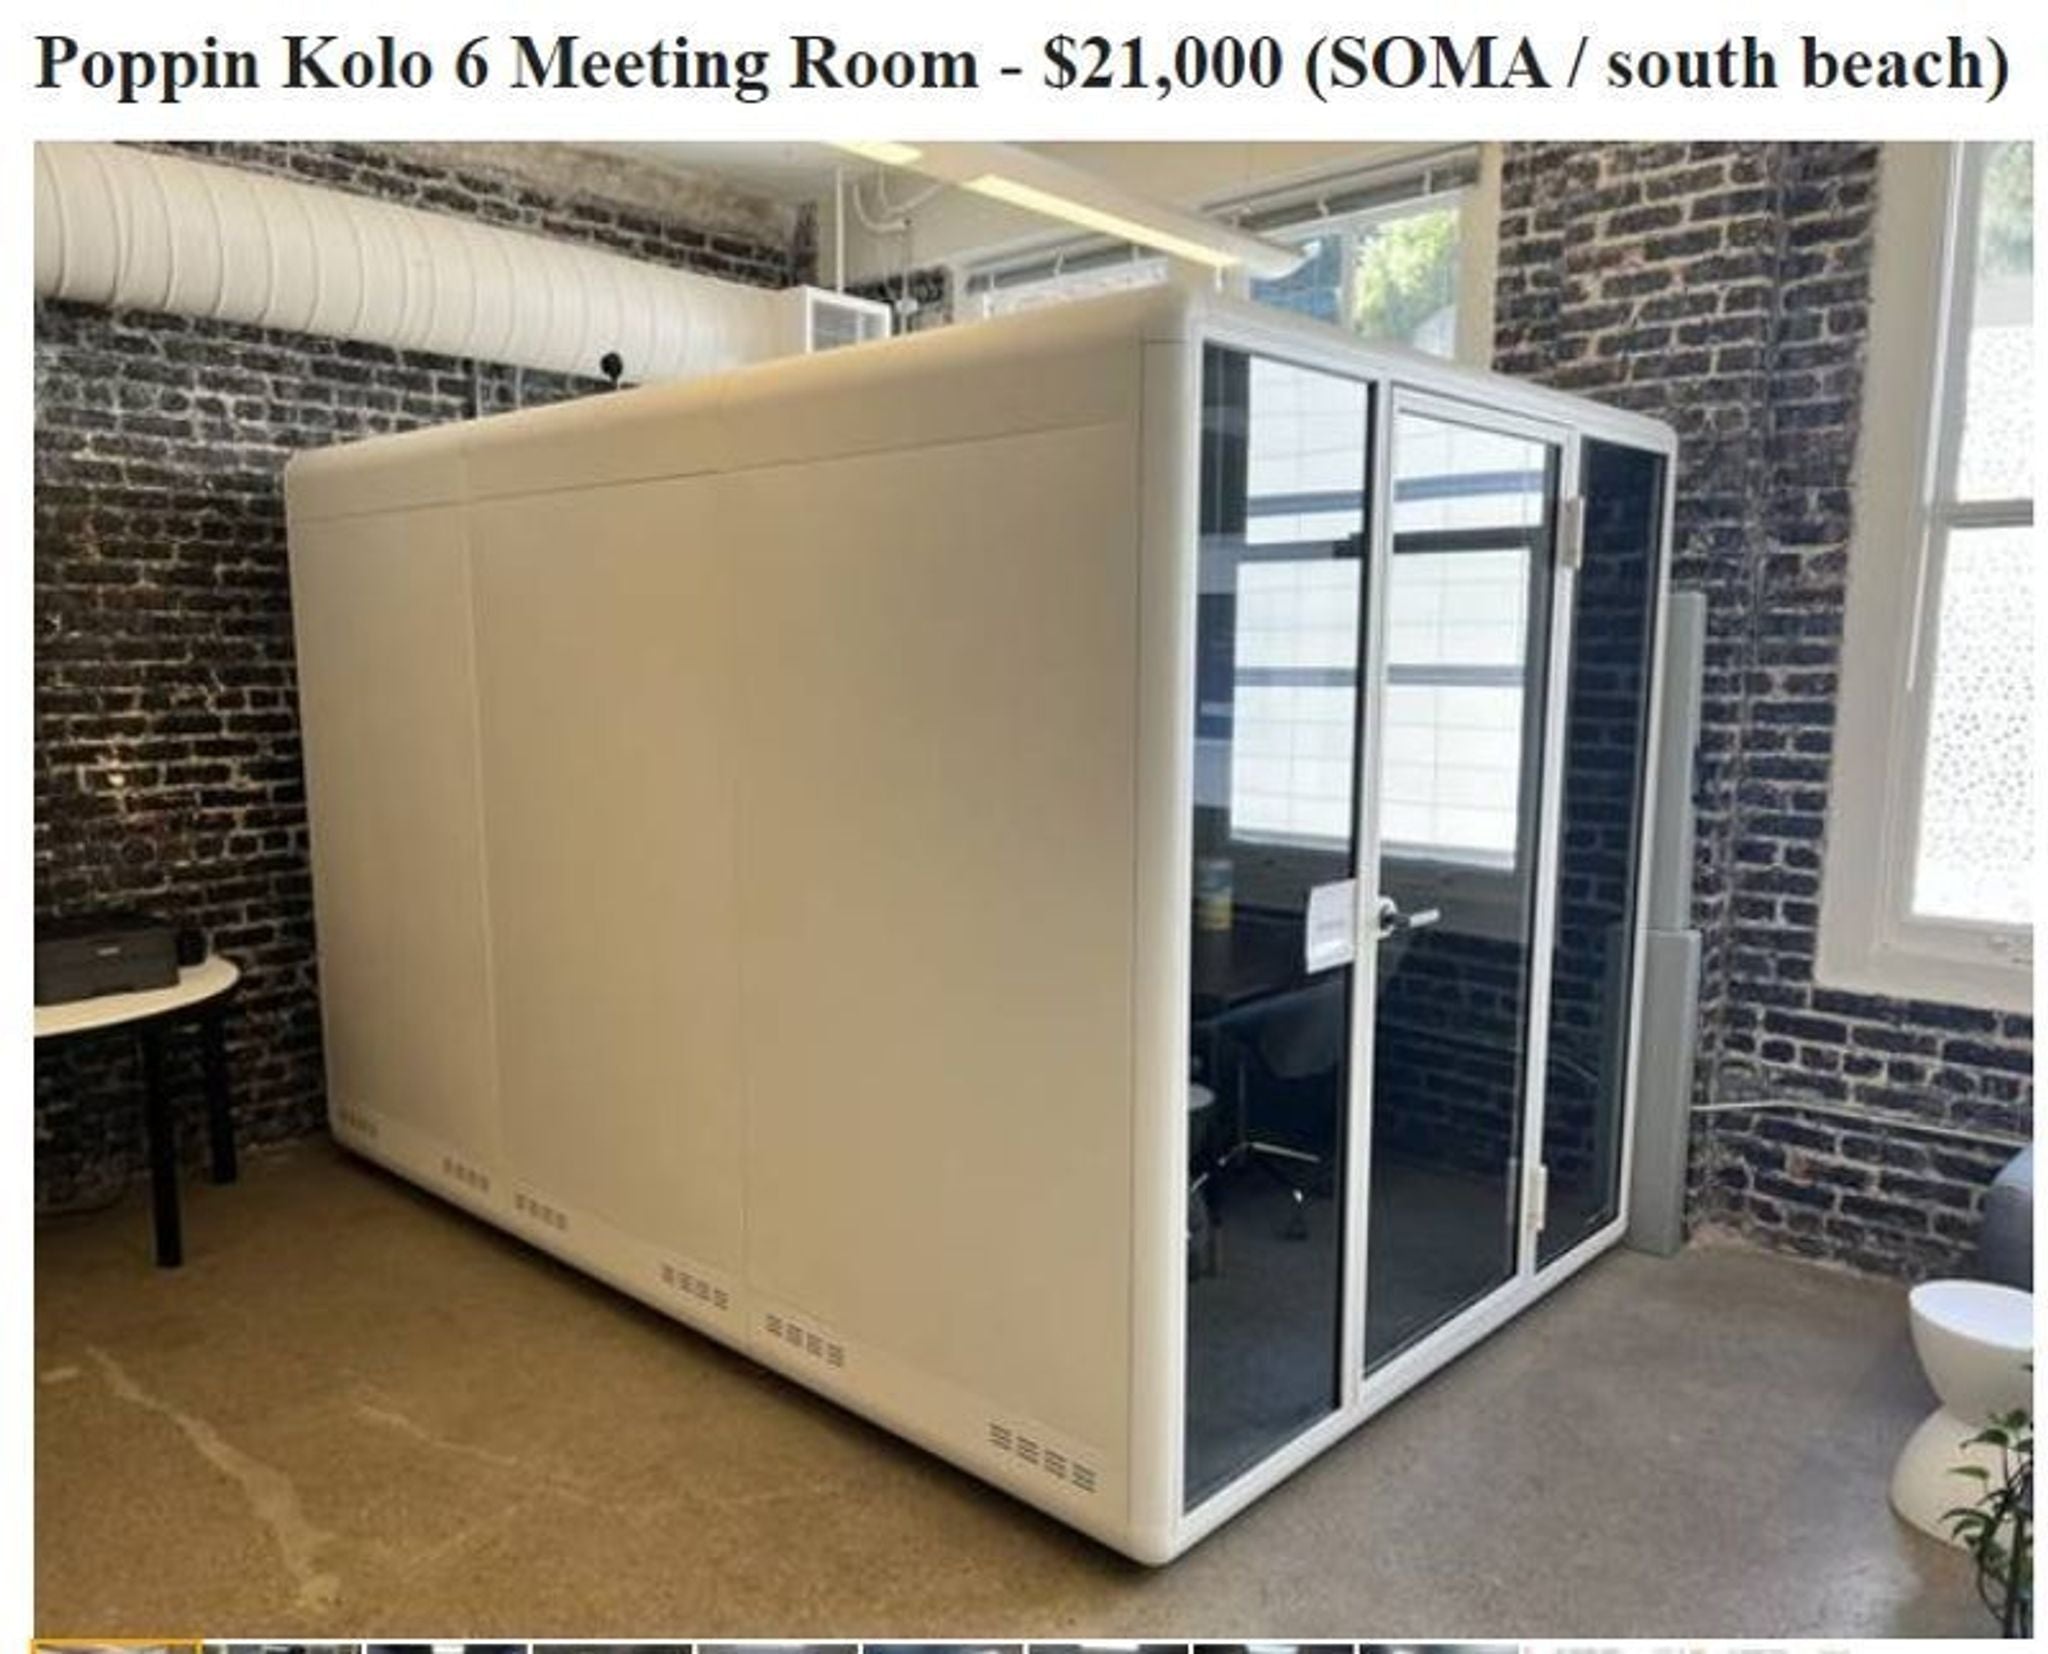 Disassembled Poppin Kolo 6 meeting pod in a modern office space, with assembly guide available.